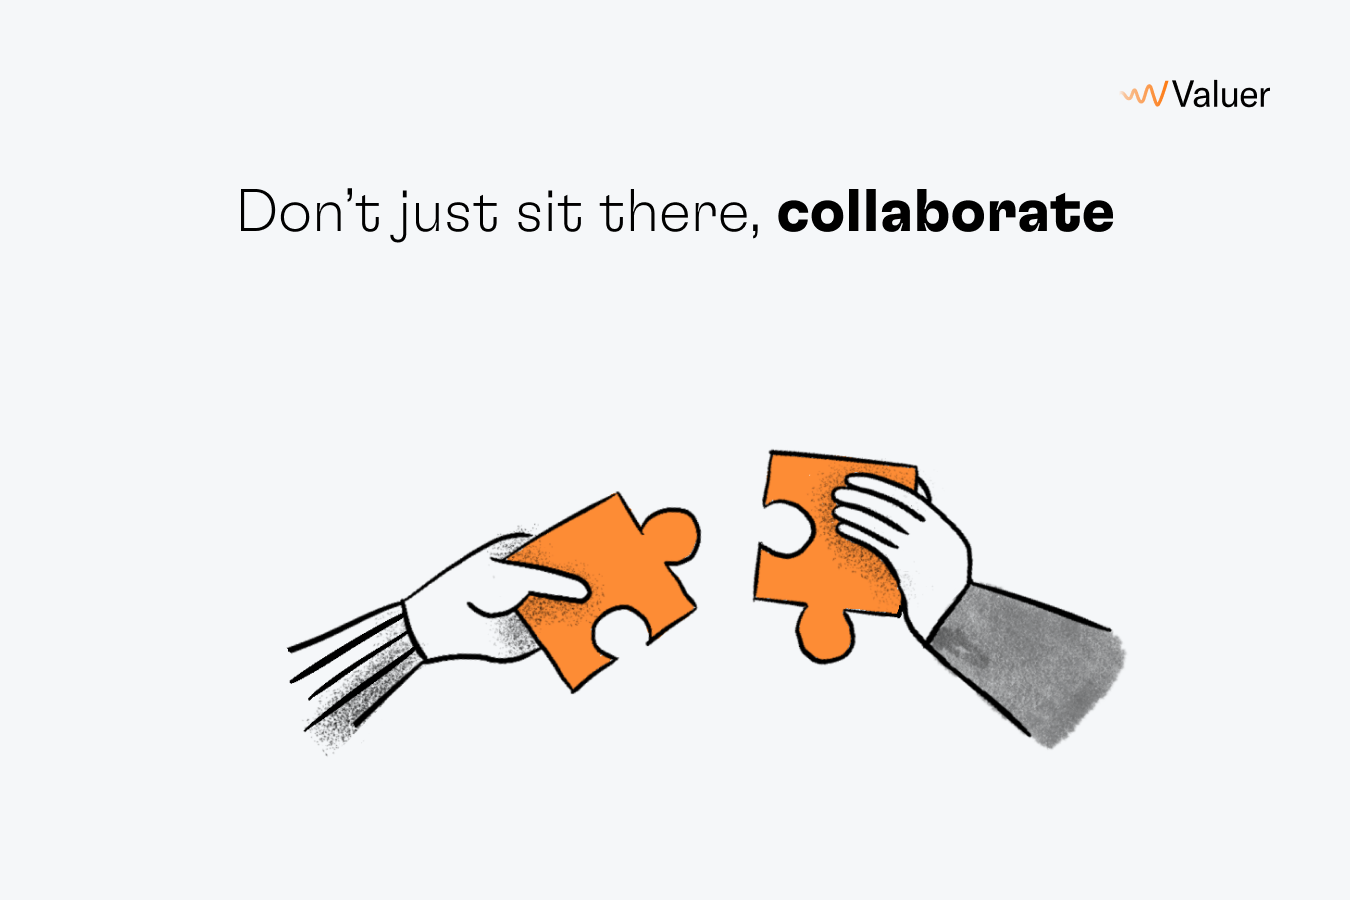 Don’t just sit there, collaborate